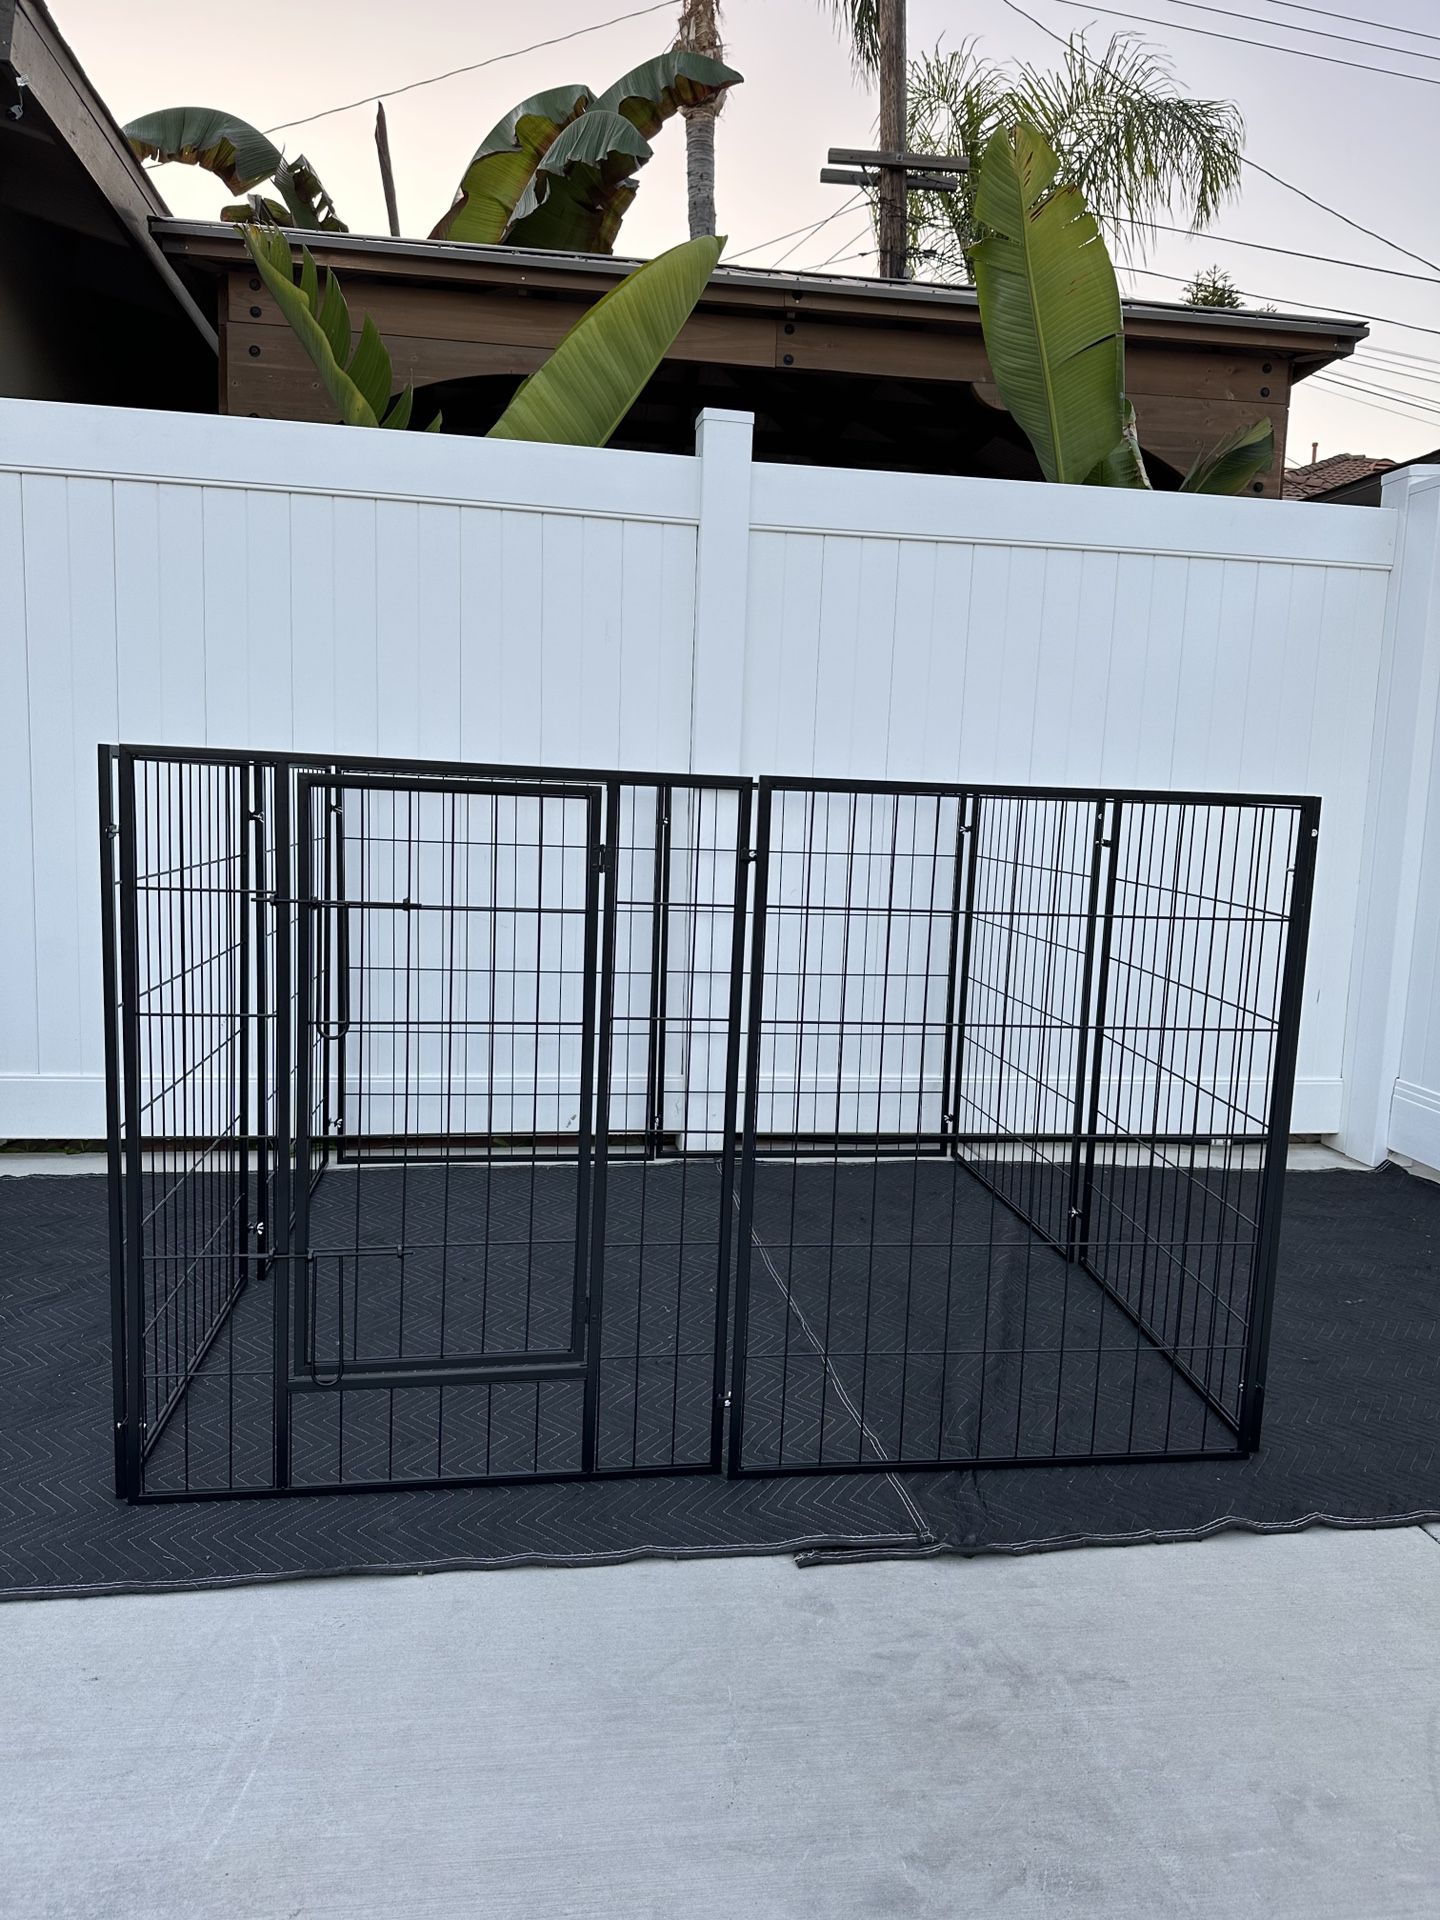 Brand New Dog Kennel/ Dog Crate/ Gates For Animals / Animal Fence With Door 